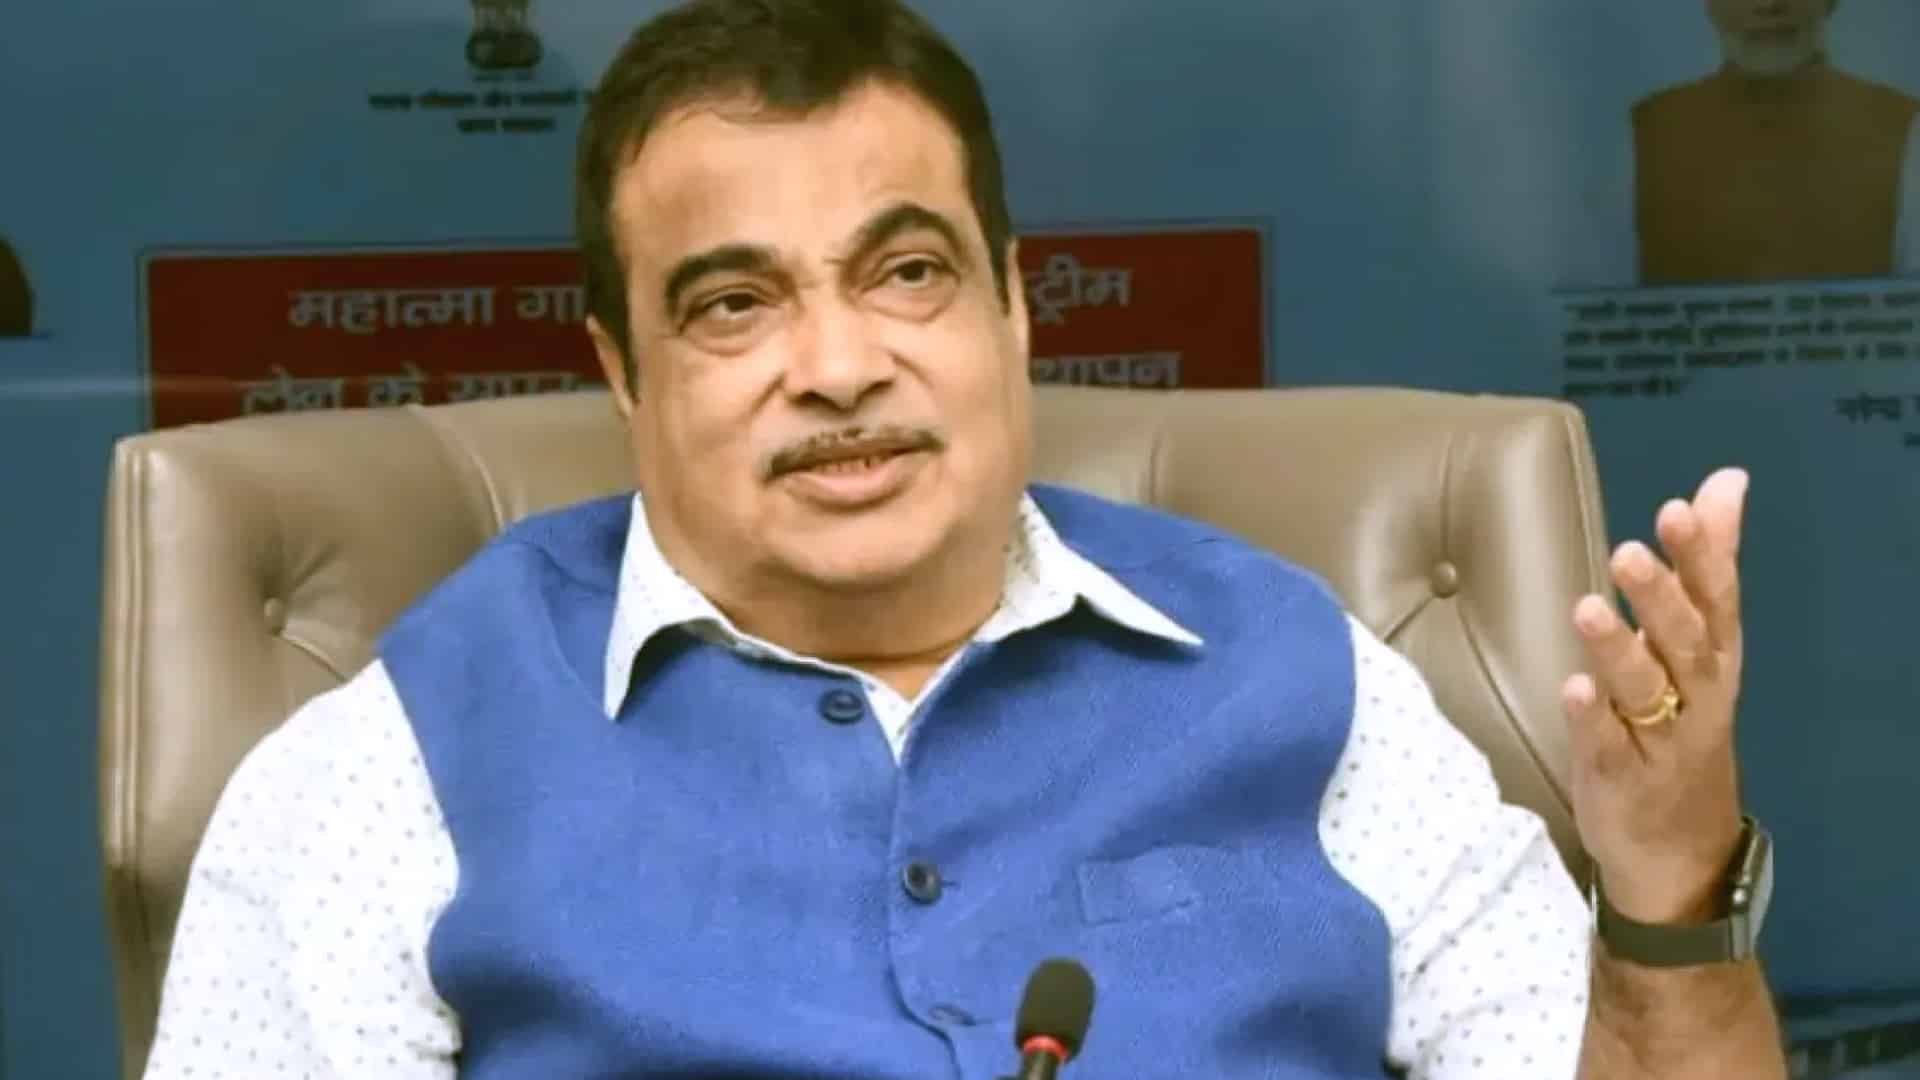 Technology and science can strengthen rural economy: Gadkari